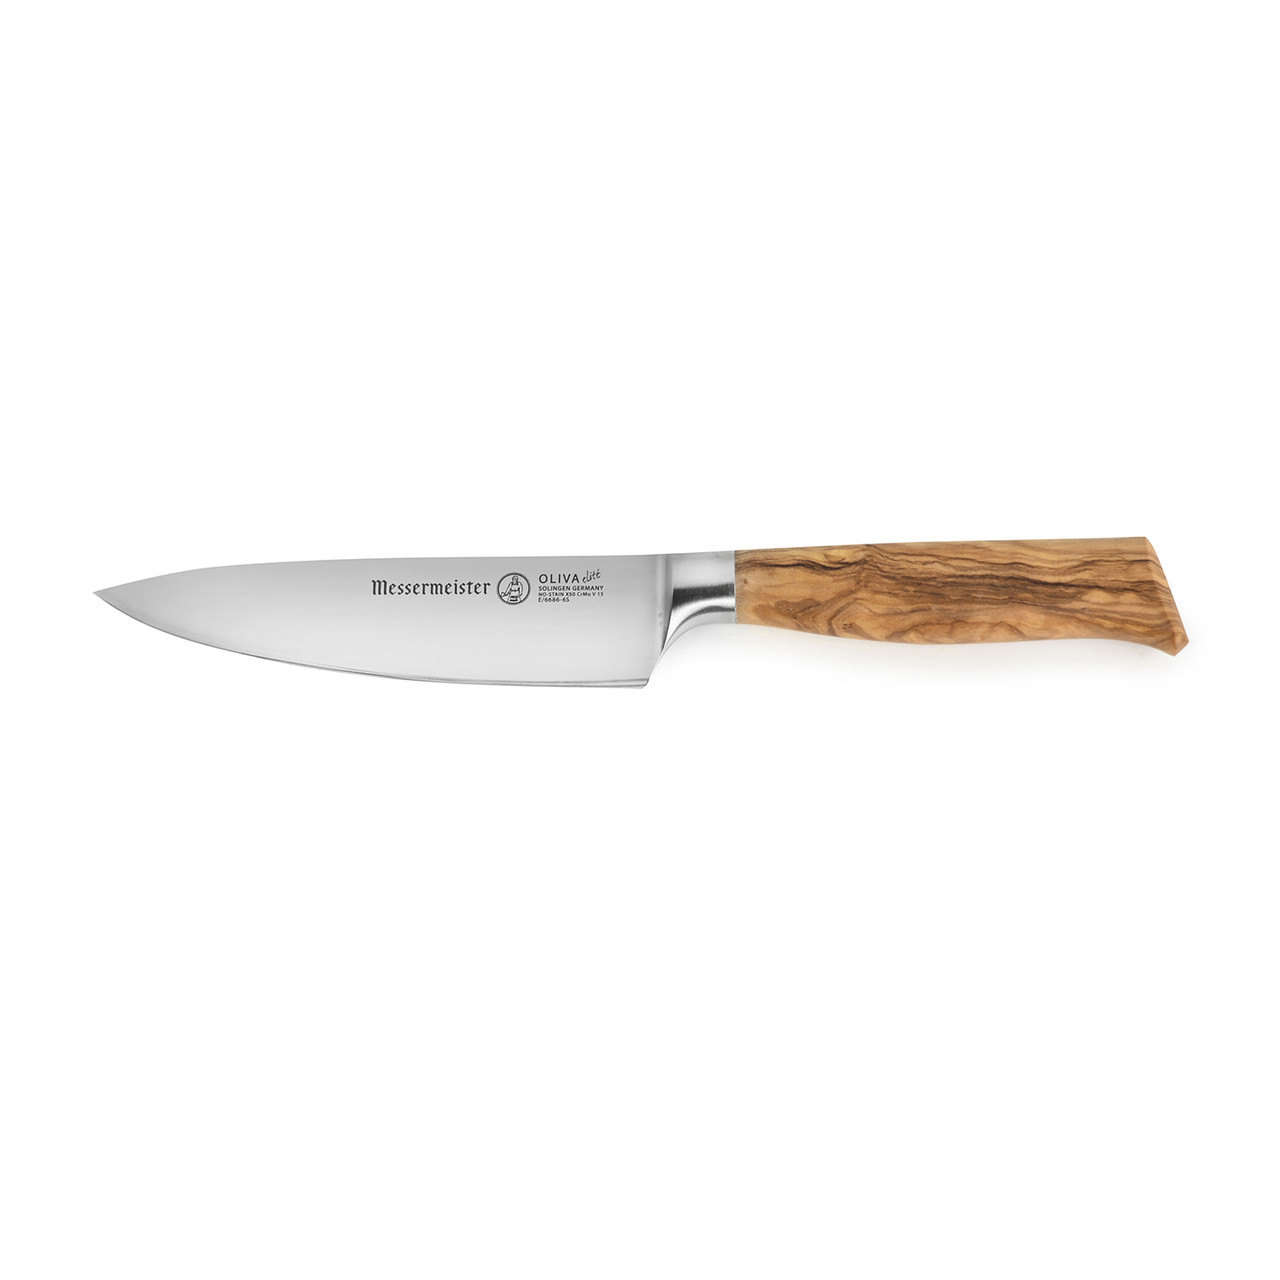 https://cdn11.bigcommerce.com/s-hccytny0od/images/stencil/1280x1280/products/2692/13012/messermeister-oliva-elite-chefs-knife-6in__28352.1602254639.jpg?c=2?imbypass=on